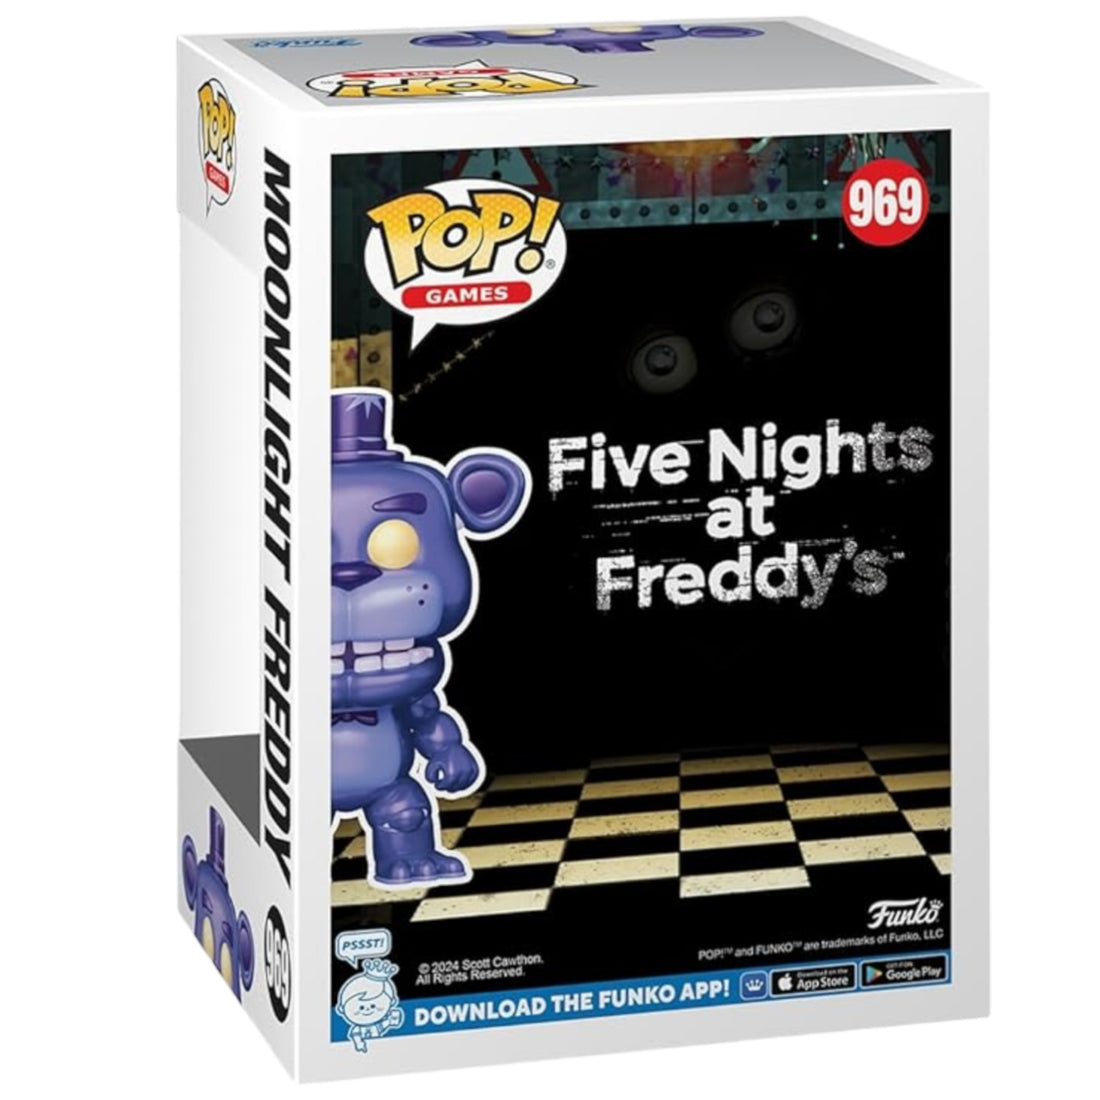 Five Nights At Freddy’s 